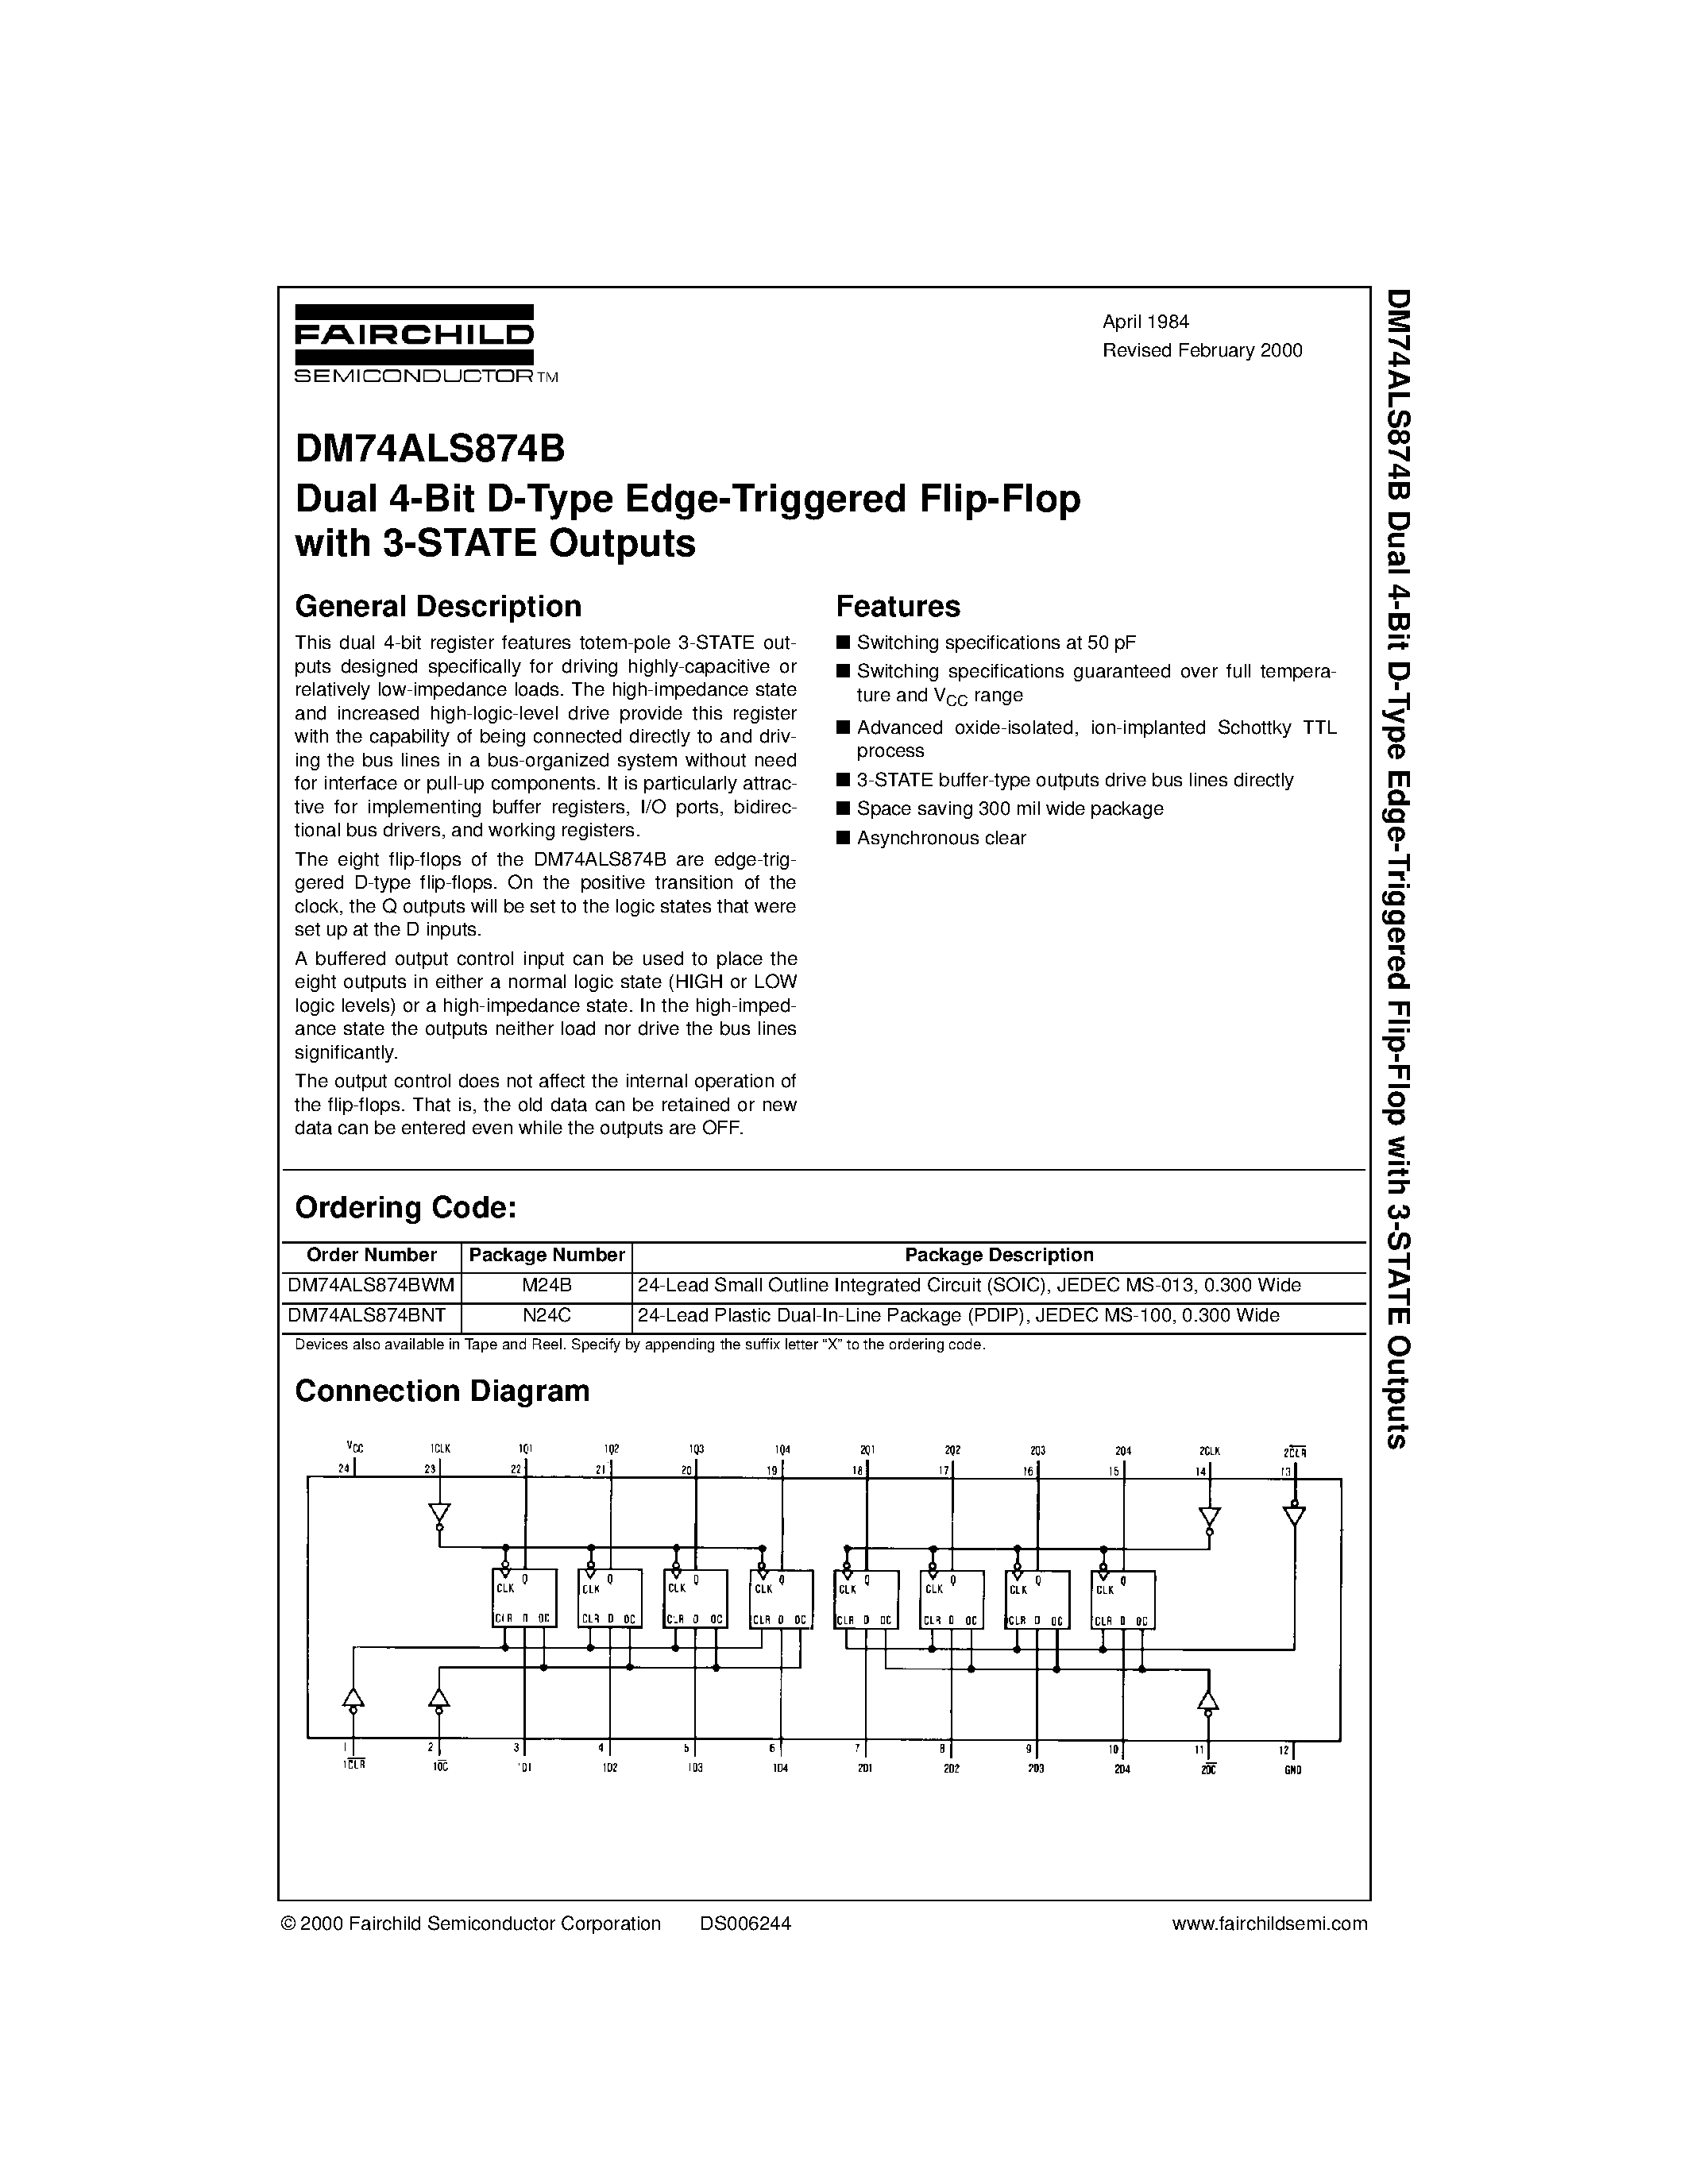 Datasheet DM74ALS874B - Dual 4-Bit D-Type Edge-Triggered Flip-Flop with 3-STATE Outputs page 1